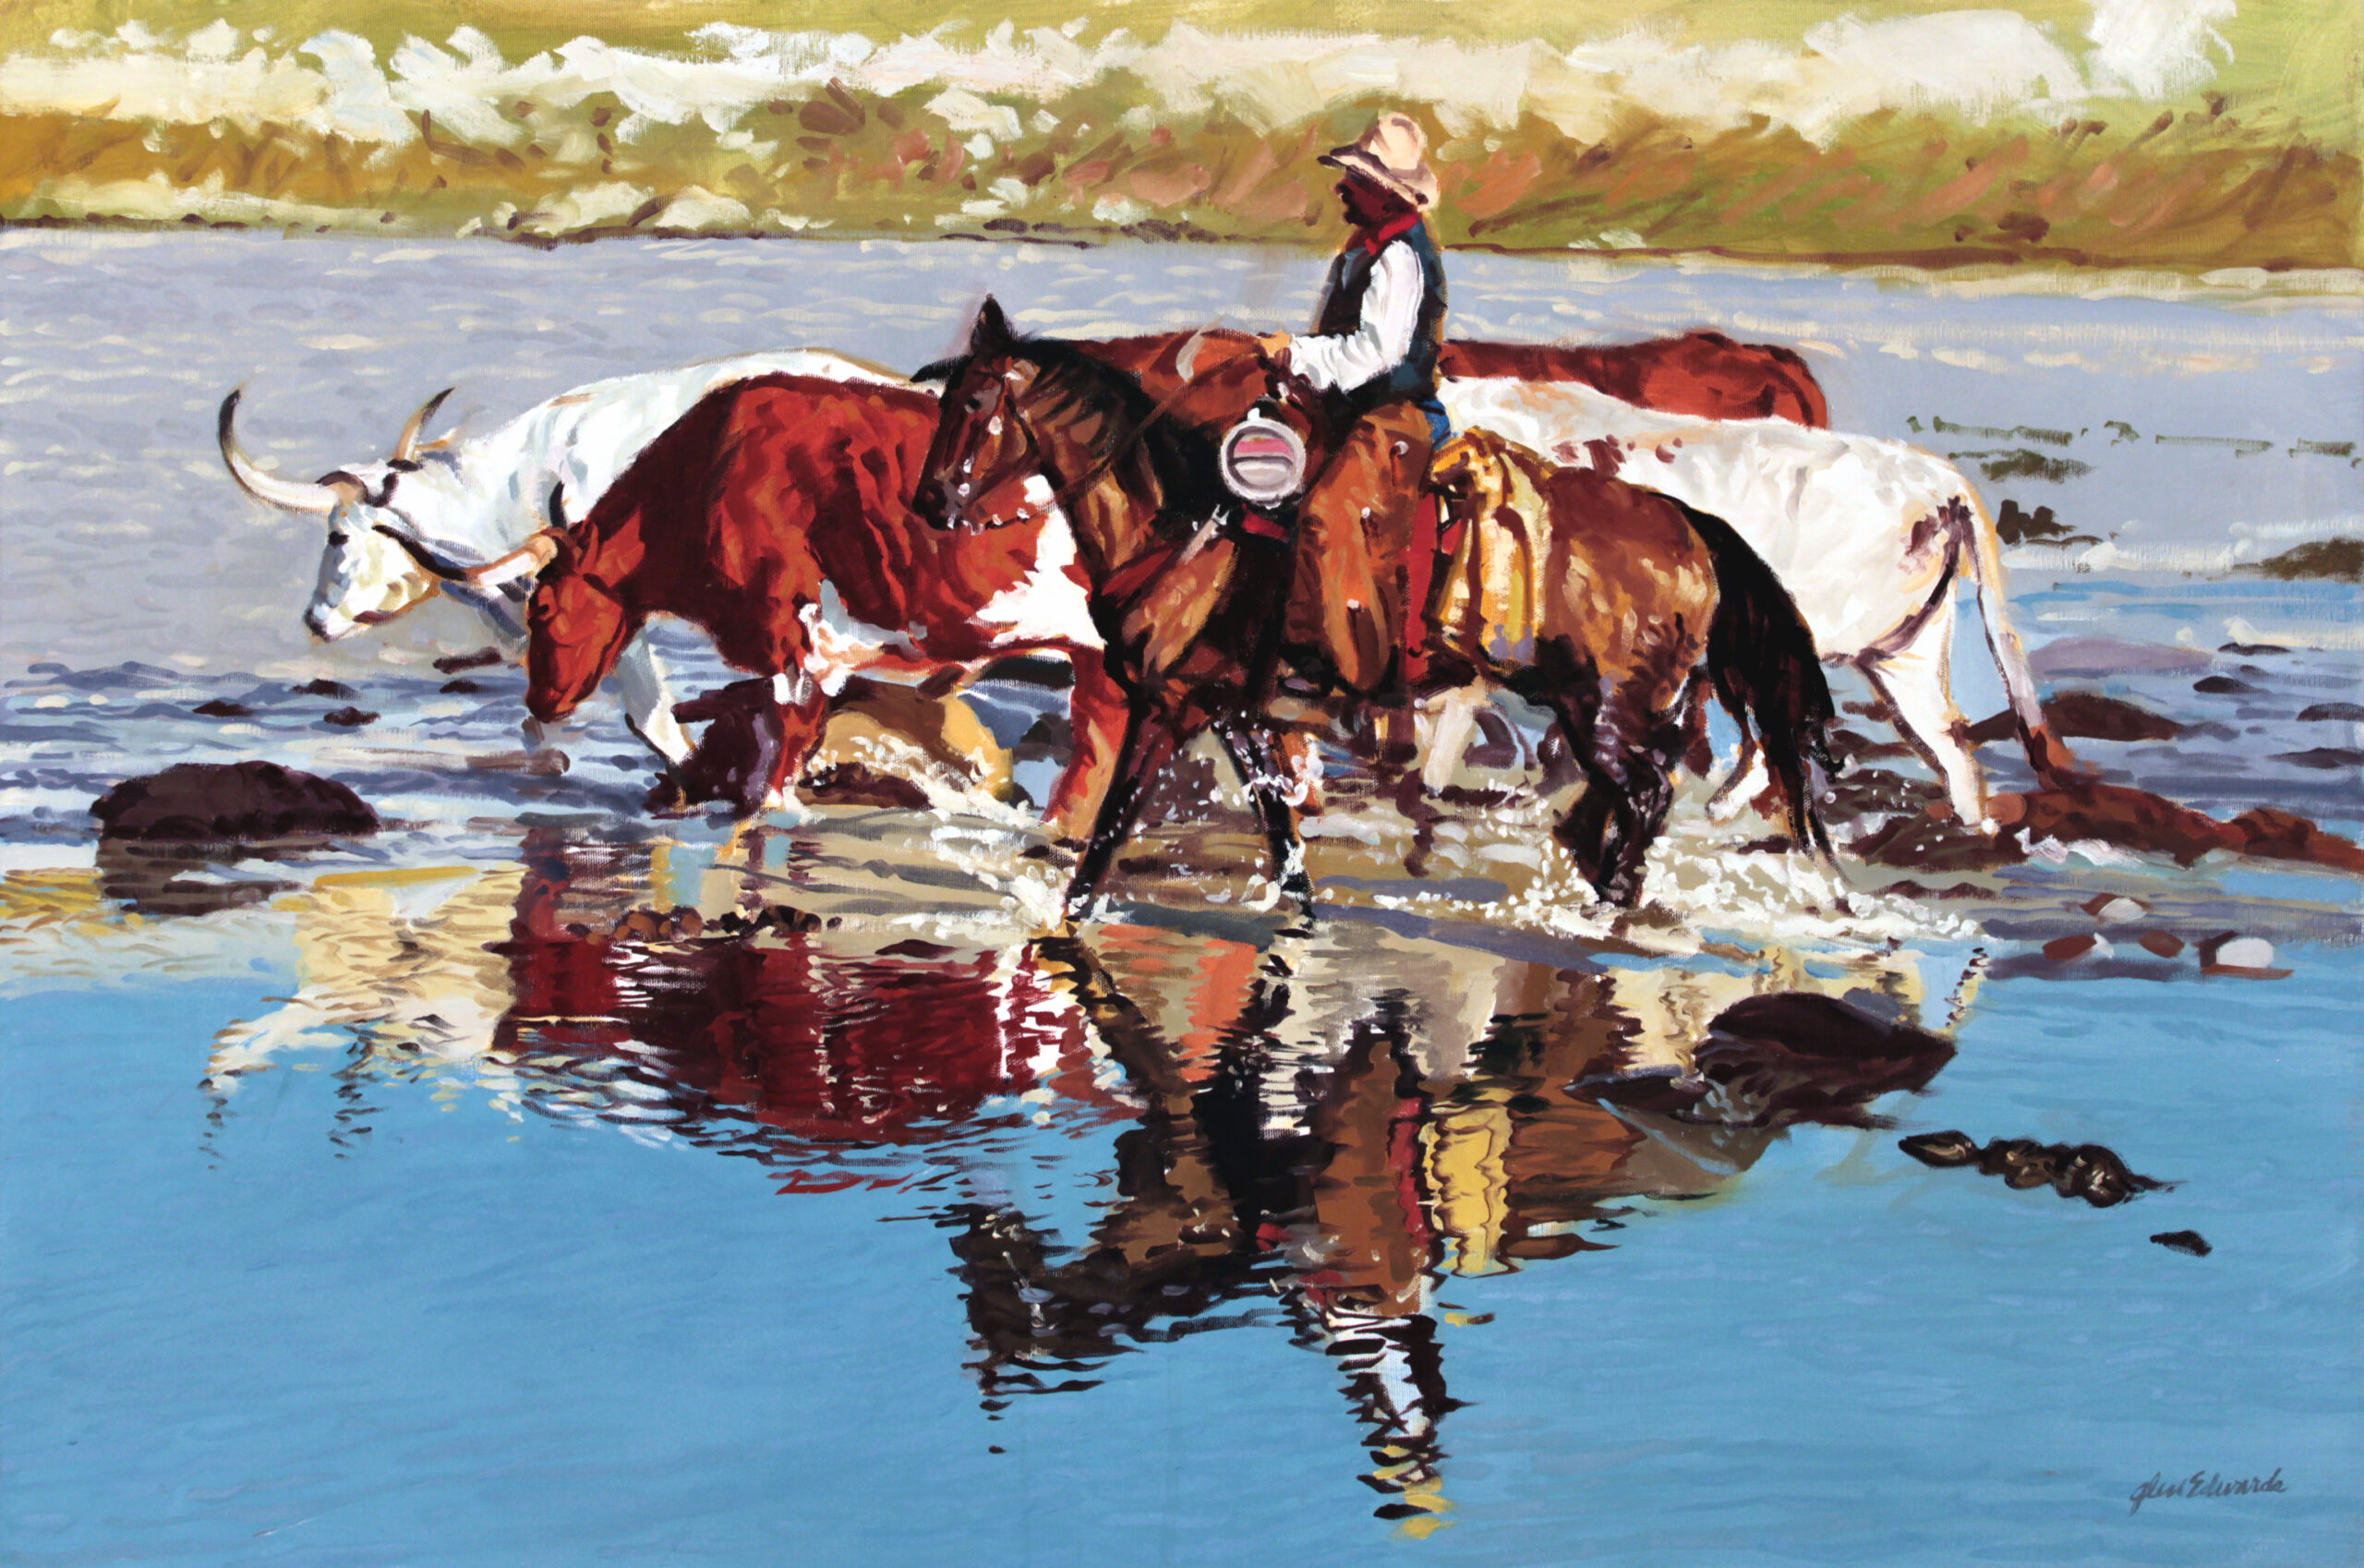 a painting of a cowboy on horseback leading cattle across a river